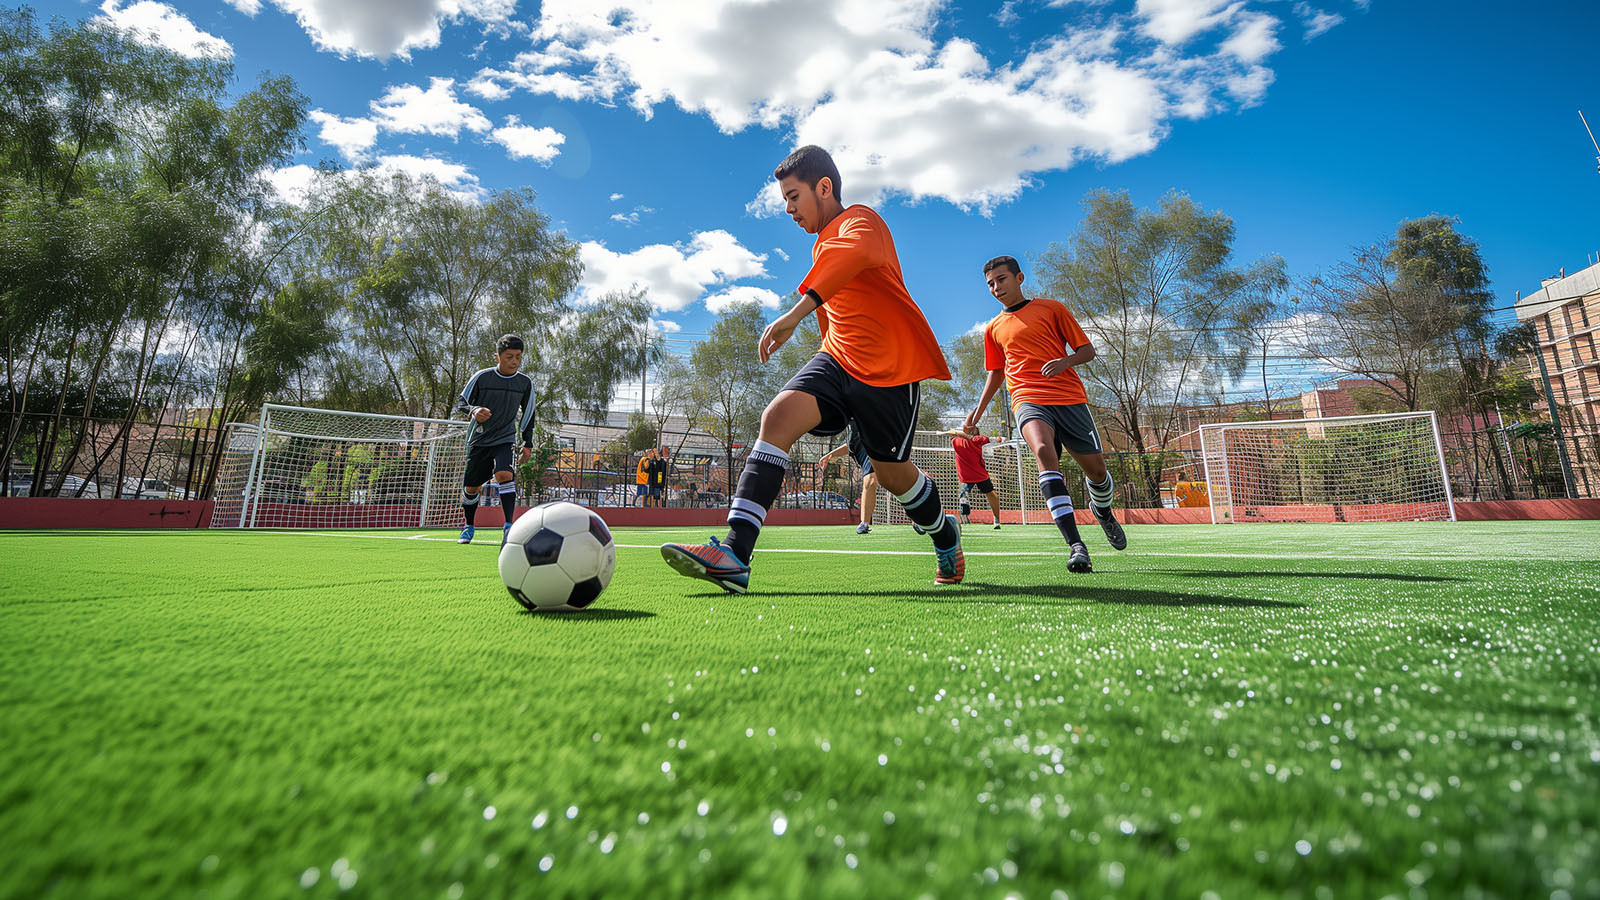 Science Behind Shock Absorption and Injury Prevention on Rubber Surfaces